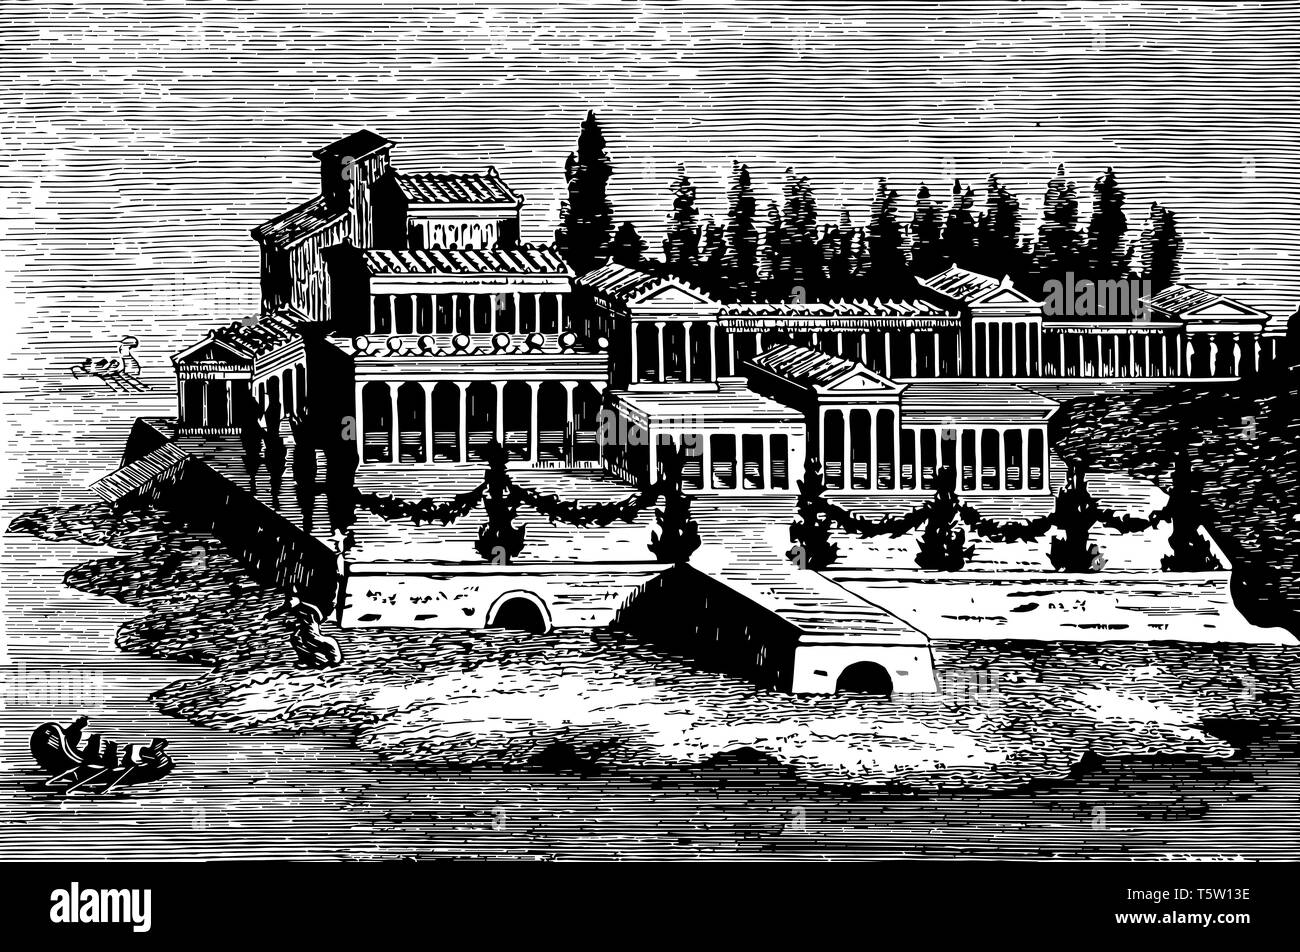 This is the beautiful image of the Roman villa. It is a fresco painting of a Roman villa. There is a larger palace along with trees. Crossing the pala Stock Vector